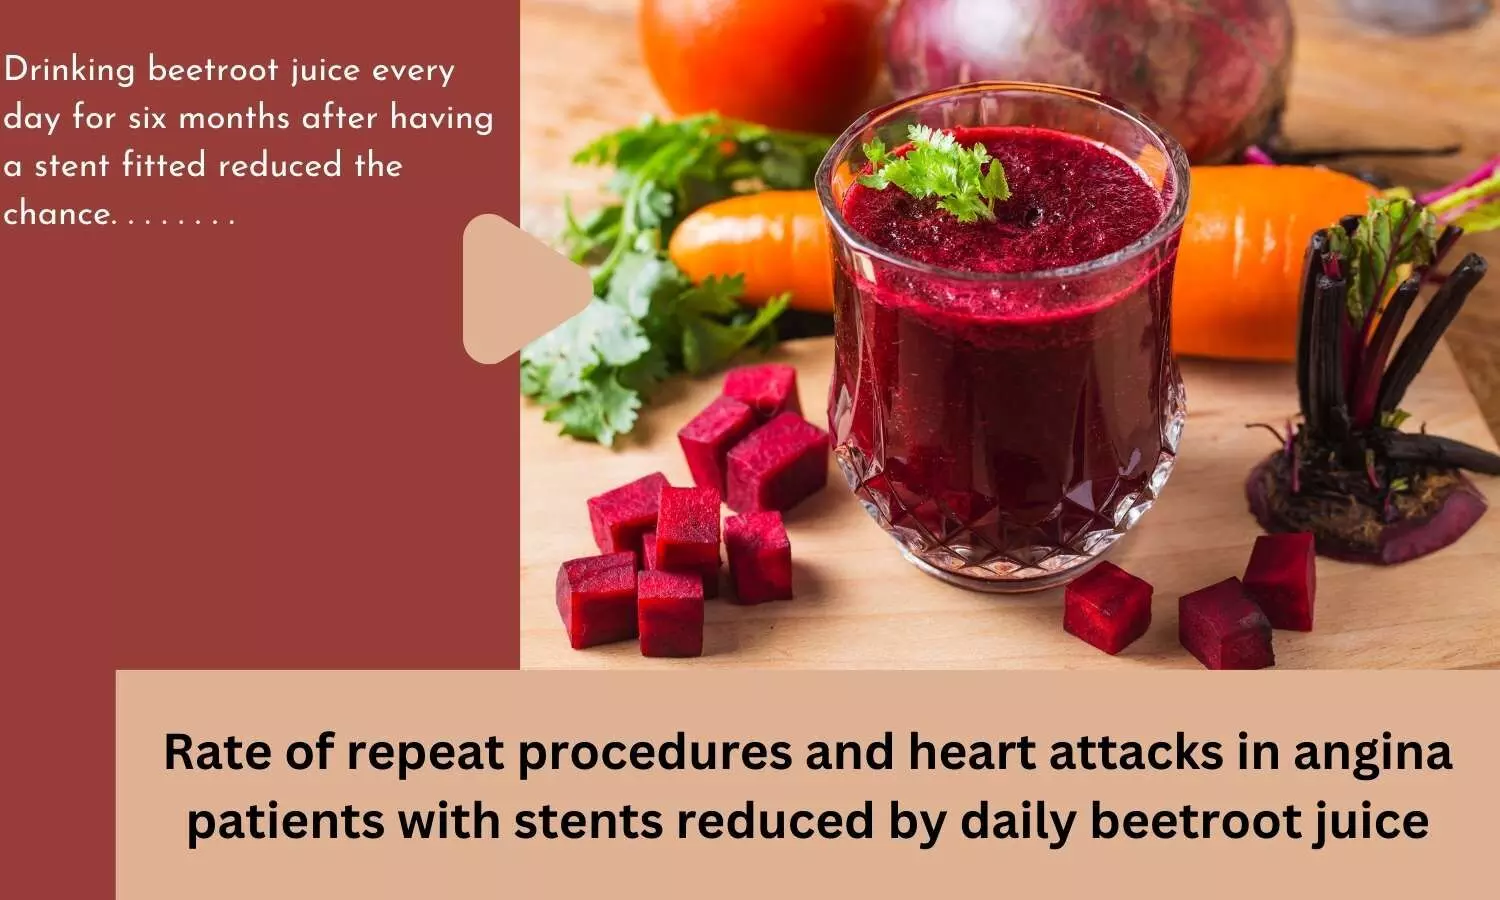 Rate of repeat procedures and heart attacks in angina patients with stents reduced by daily beetroot juice